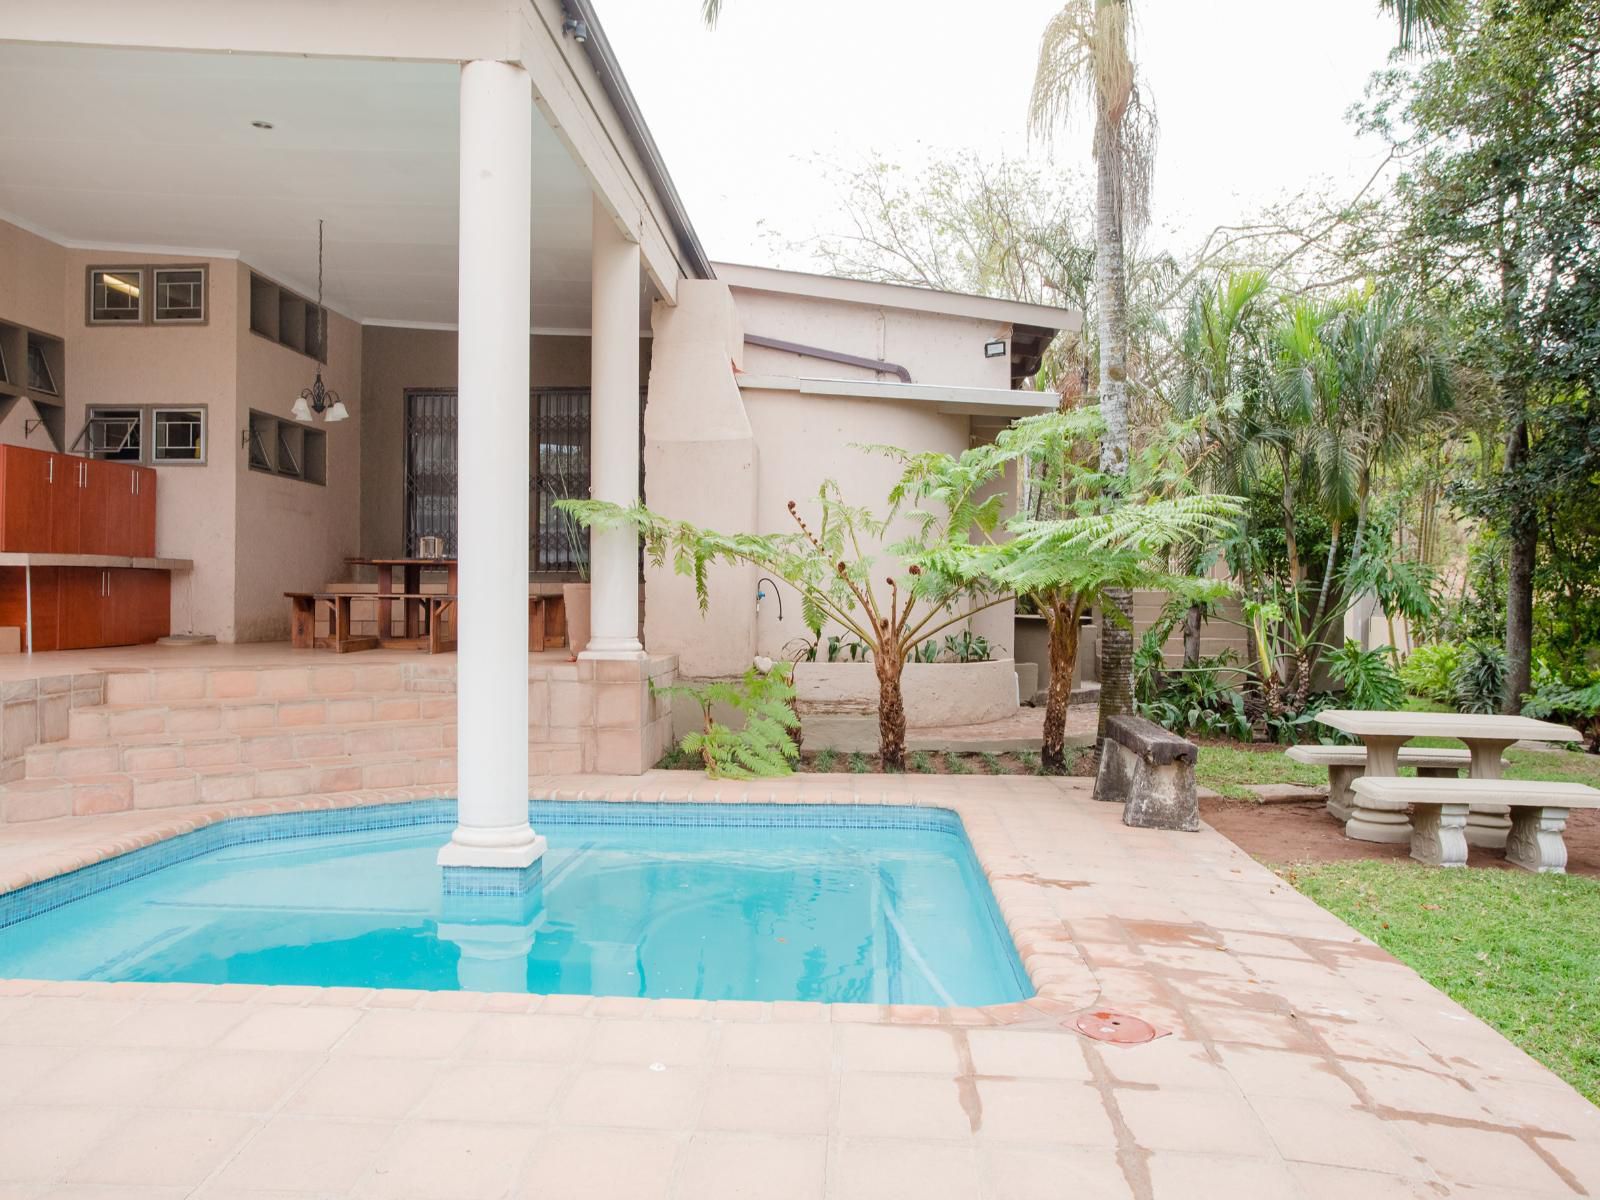 4 Gazelle Guesthouse The Rest 454 Jt Nelspruit Mpumalanga South Africa House, Building, Architecture, Palm Tree, Plant, Nature, Wood, Garden, Swimming Pool